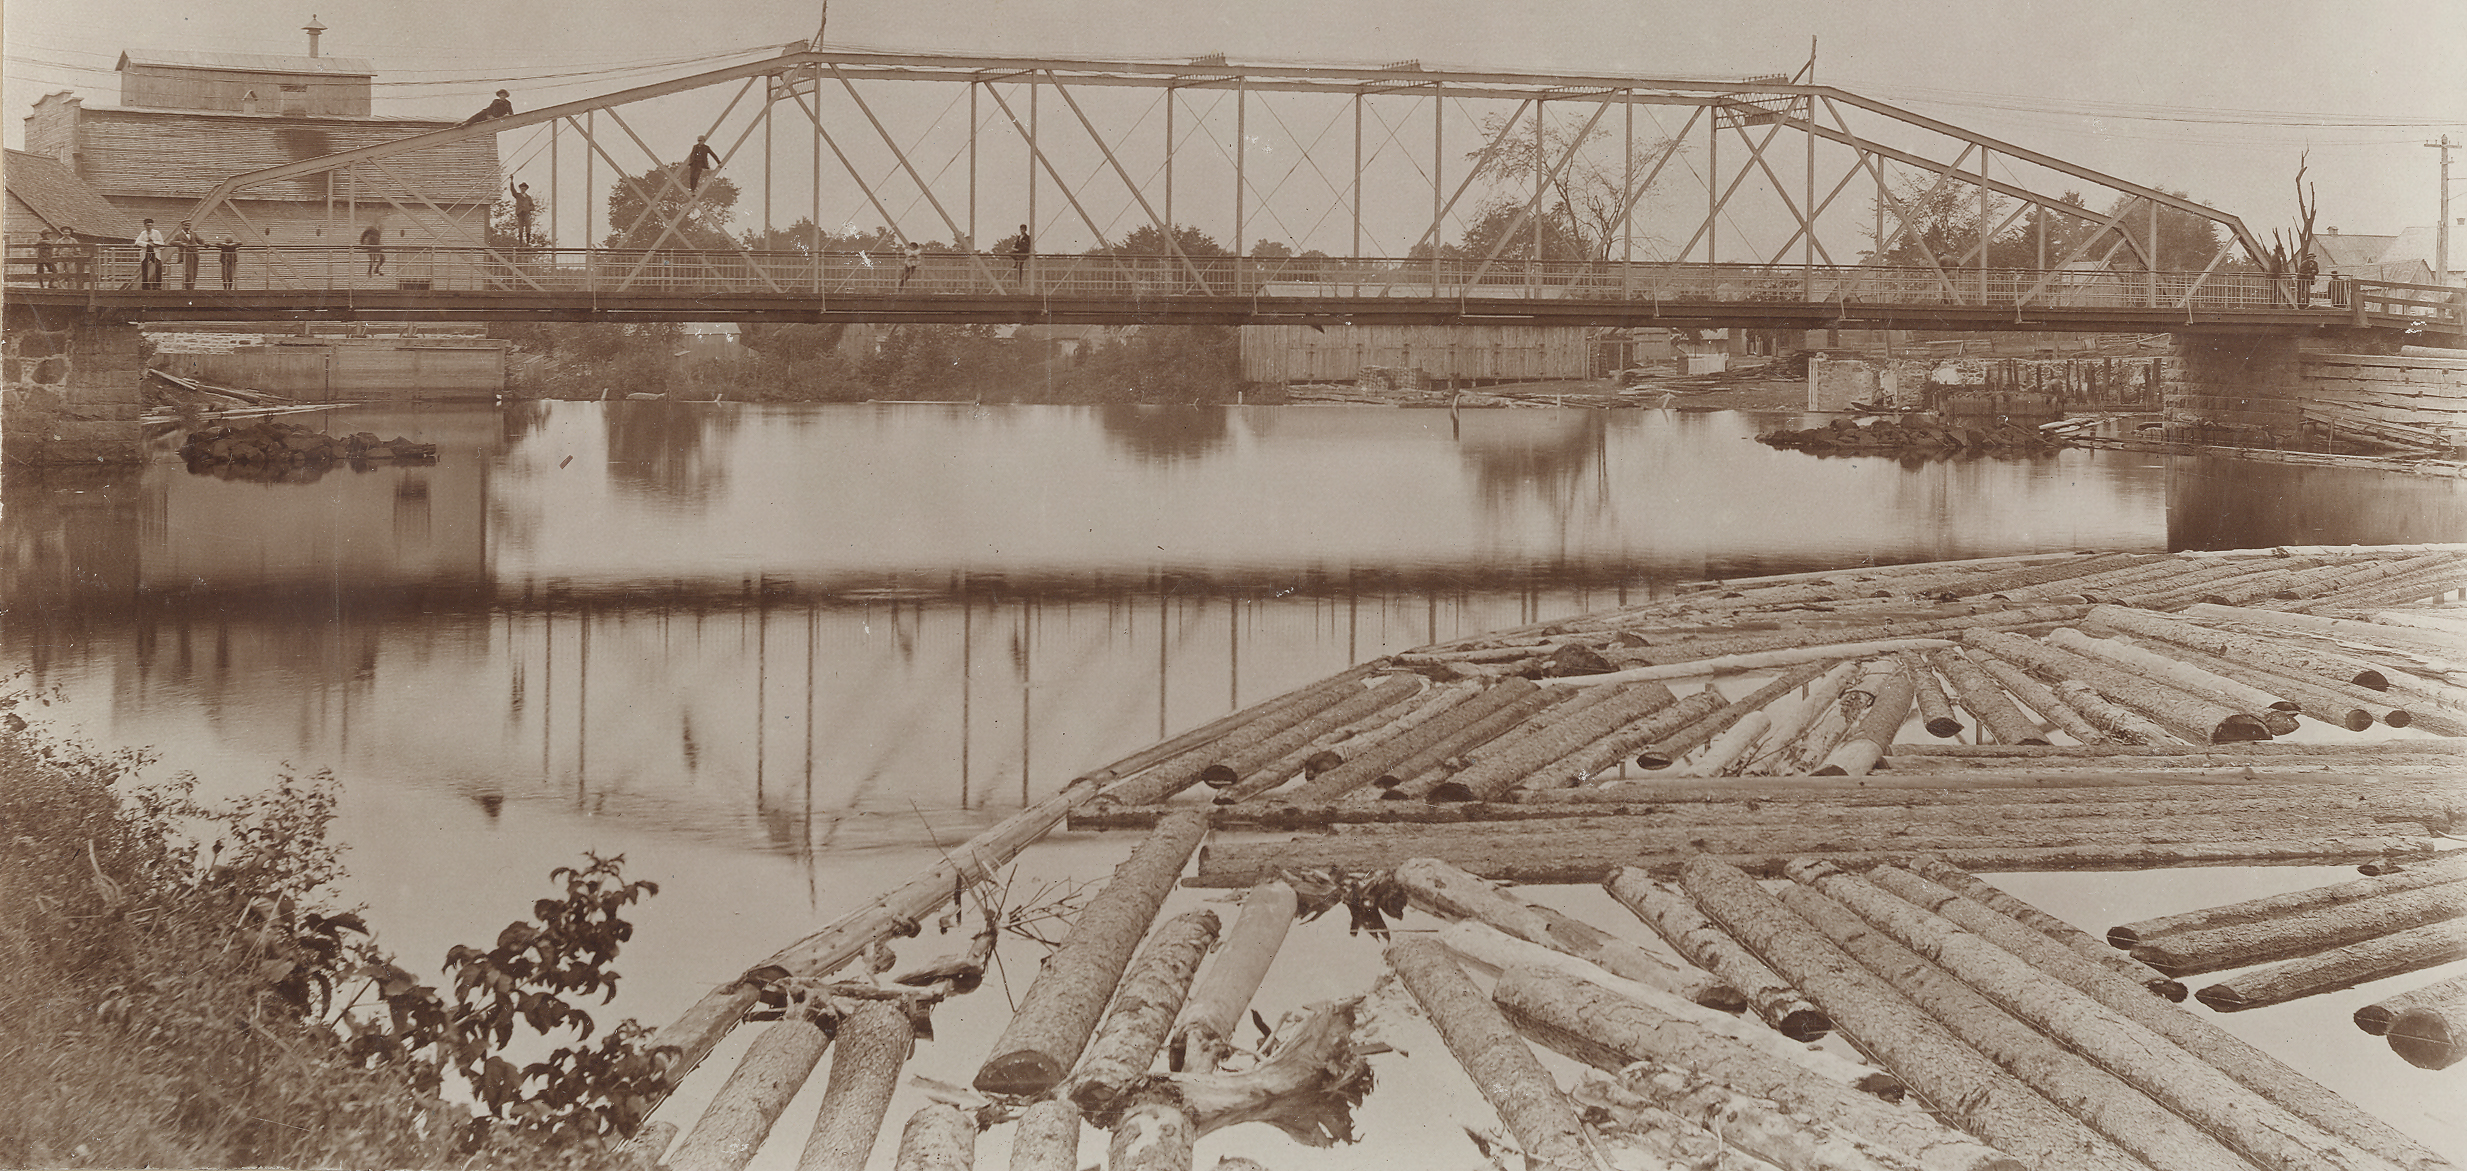 Sepia-tone photograph of an iron bridge and river in summer. People can be seen on the bridge deck and on the girders up above. A log boom is visible in the foreground, with some wooden buildings in the background.